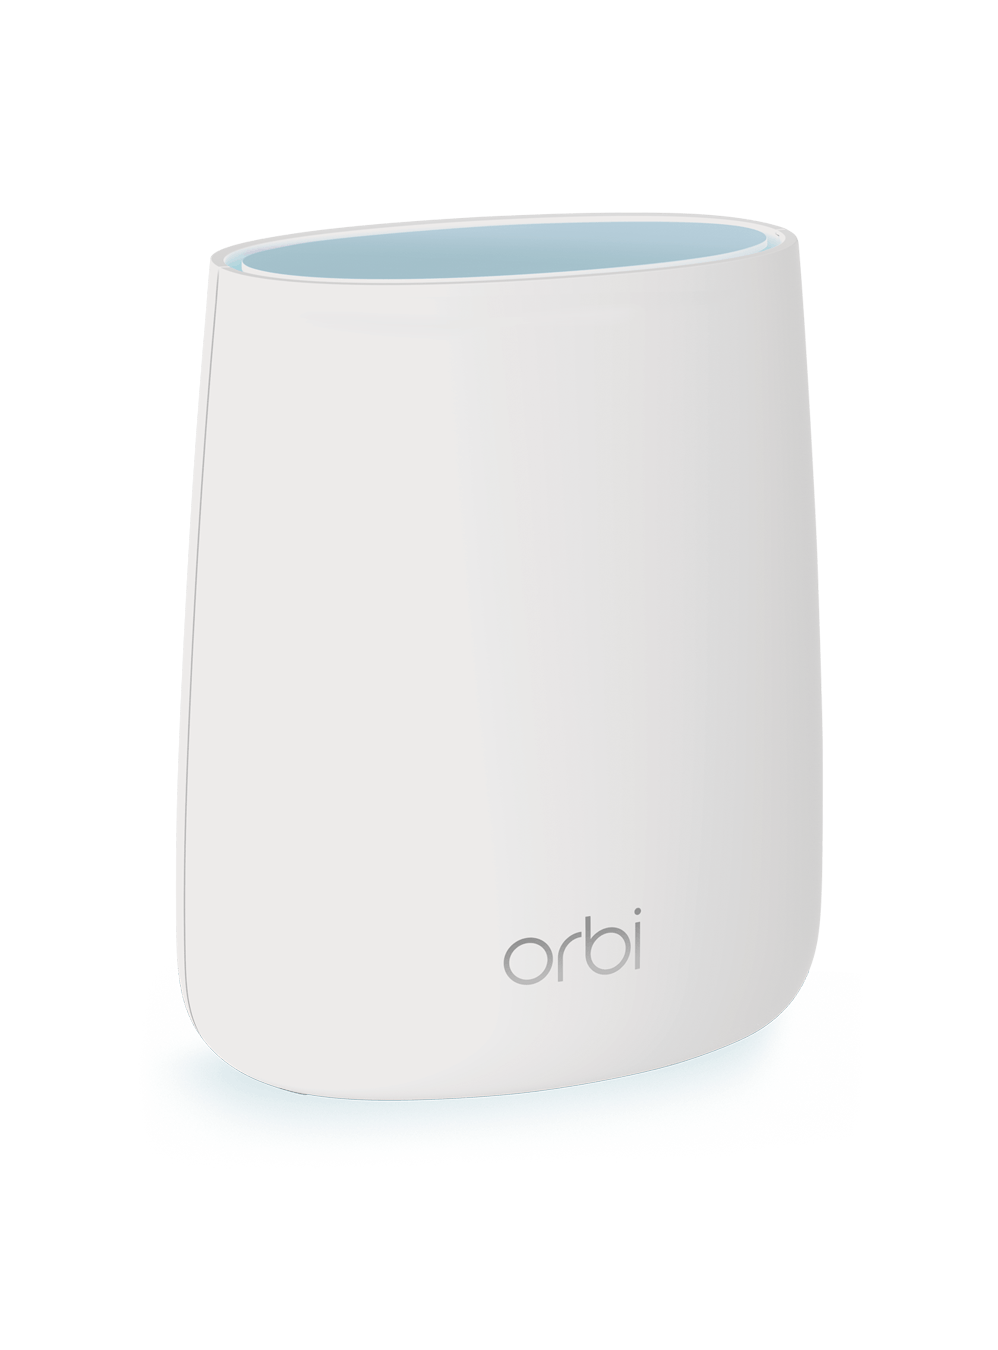 Top 8 WiFi Routers of 2020 Router Network